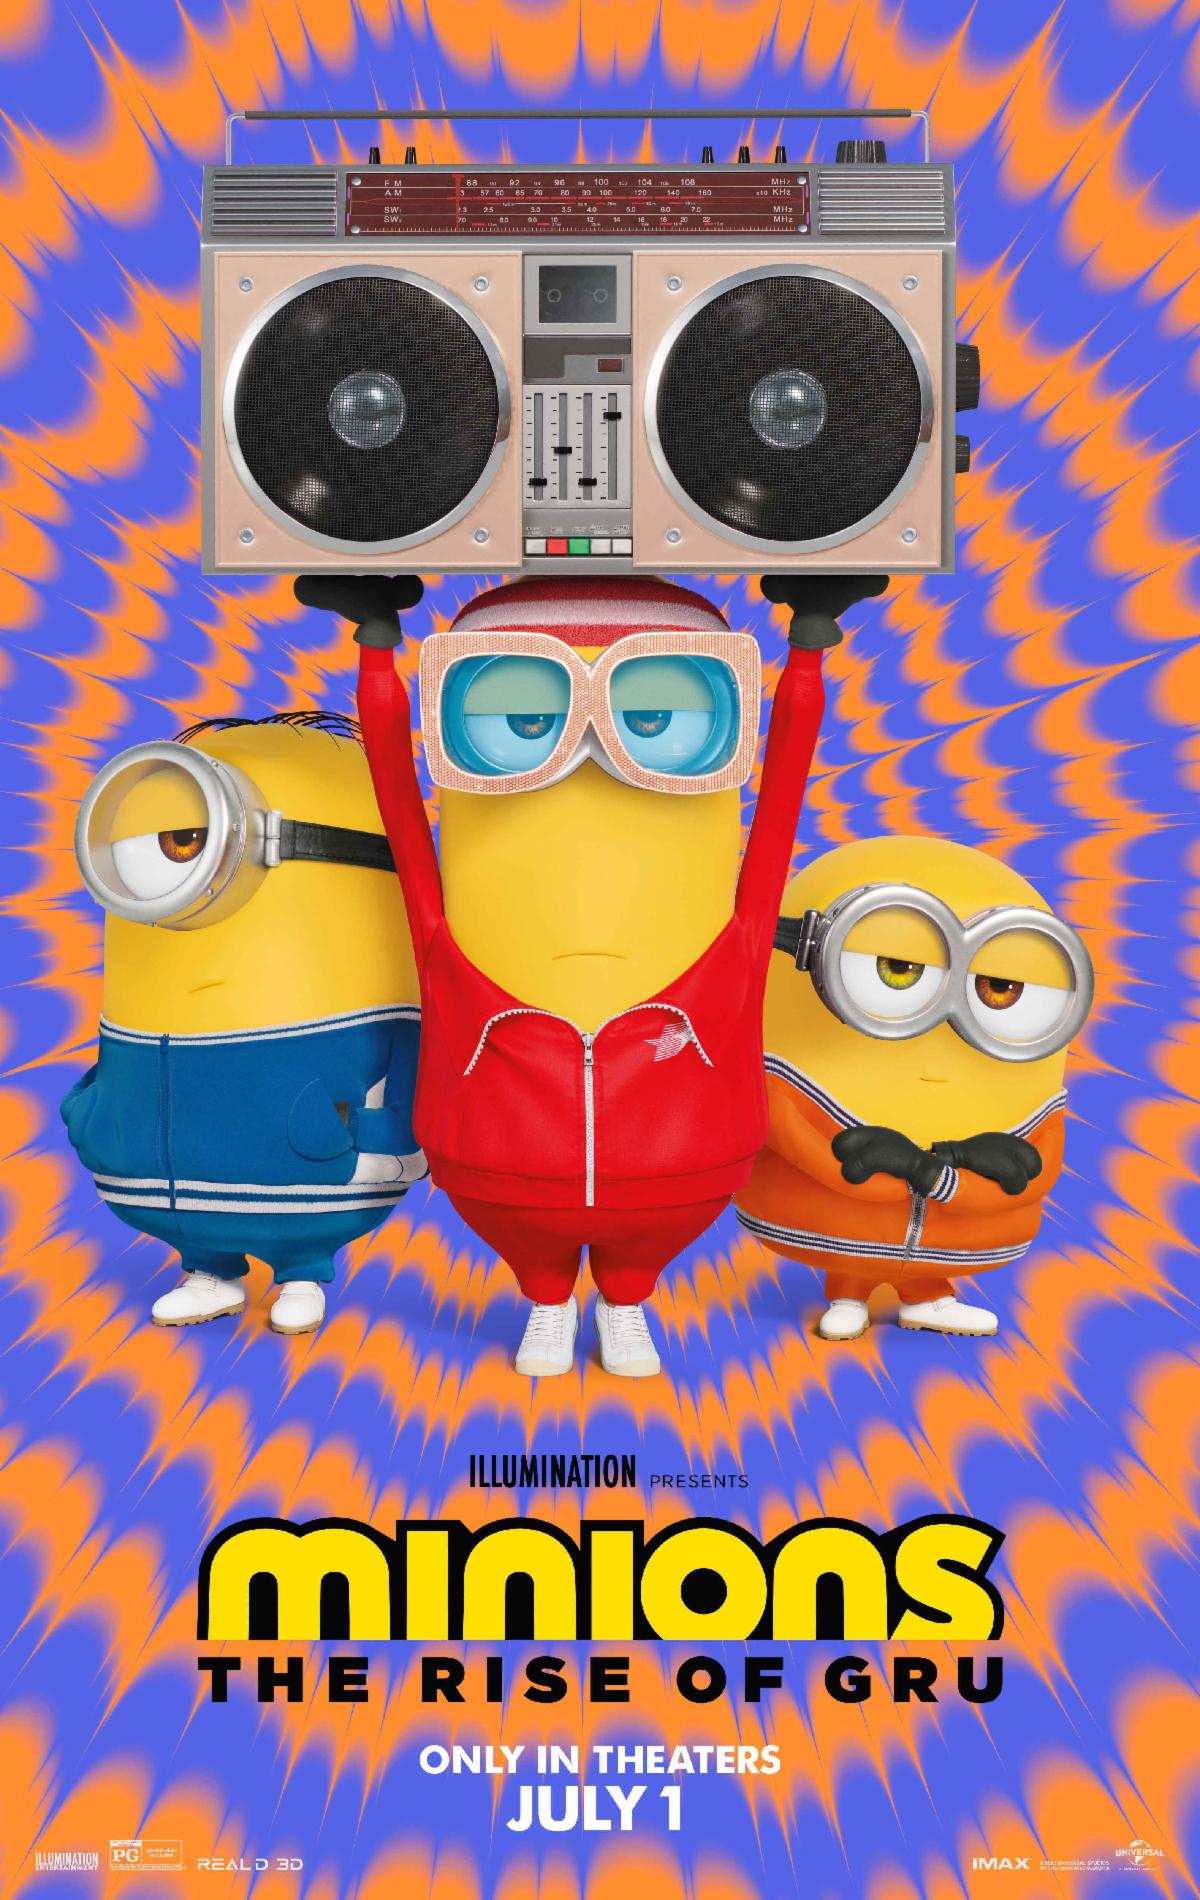 New Trailer Unleashed For Illuminations MINIONS THE RISE OF GRU Icon Vs